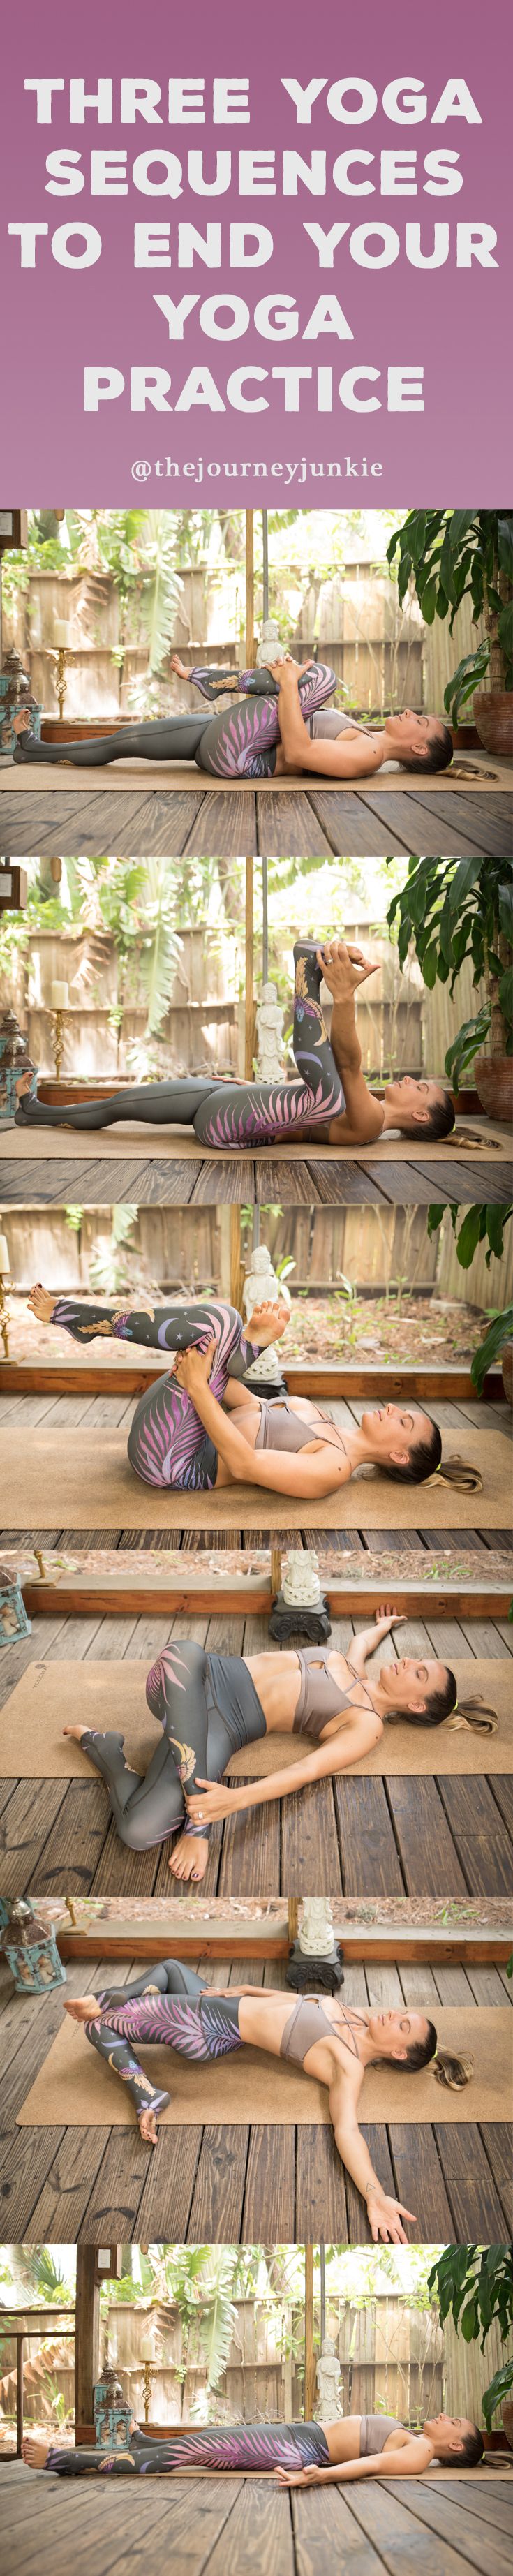 Three Closing Yoga Sequences (+ Free Tutorial Guide) - Pin now, download your fr...